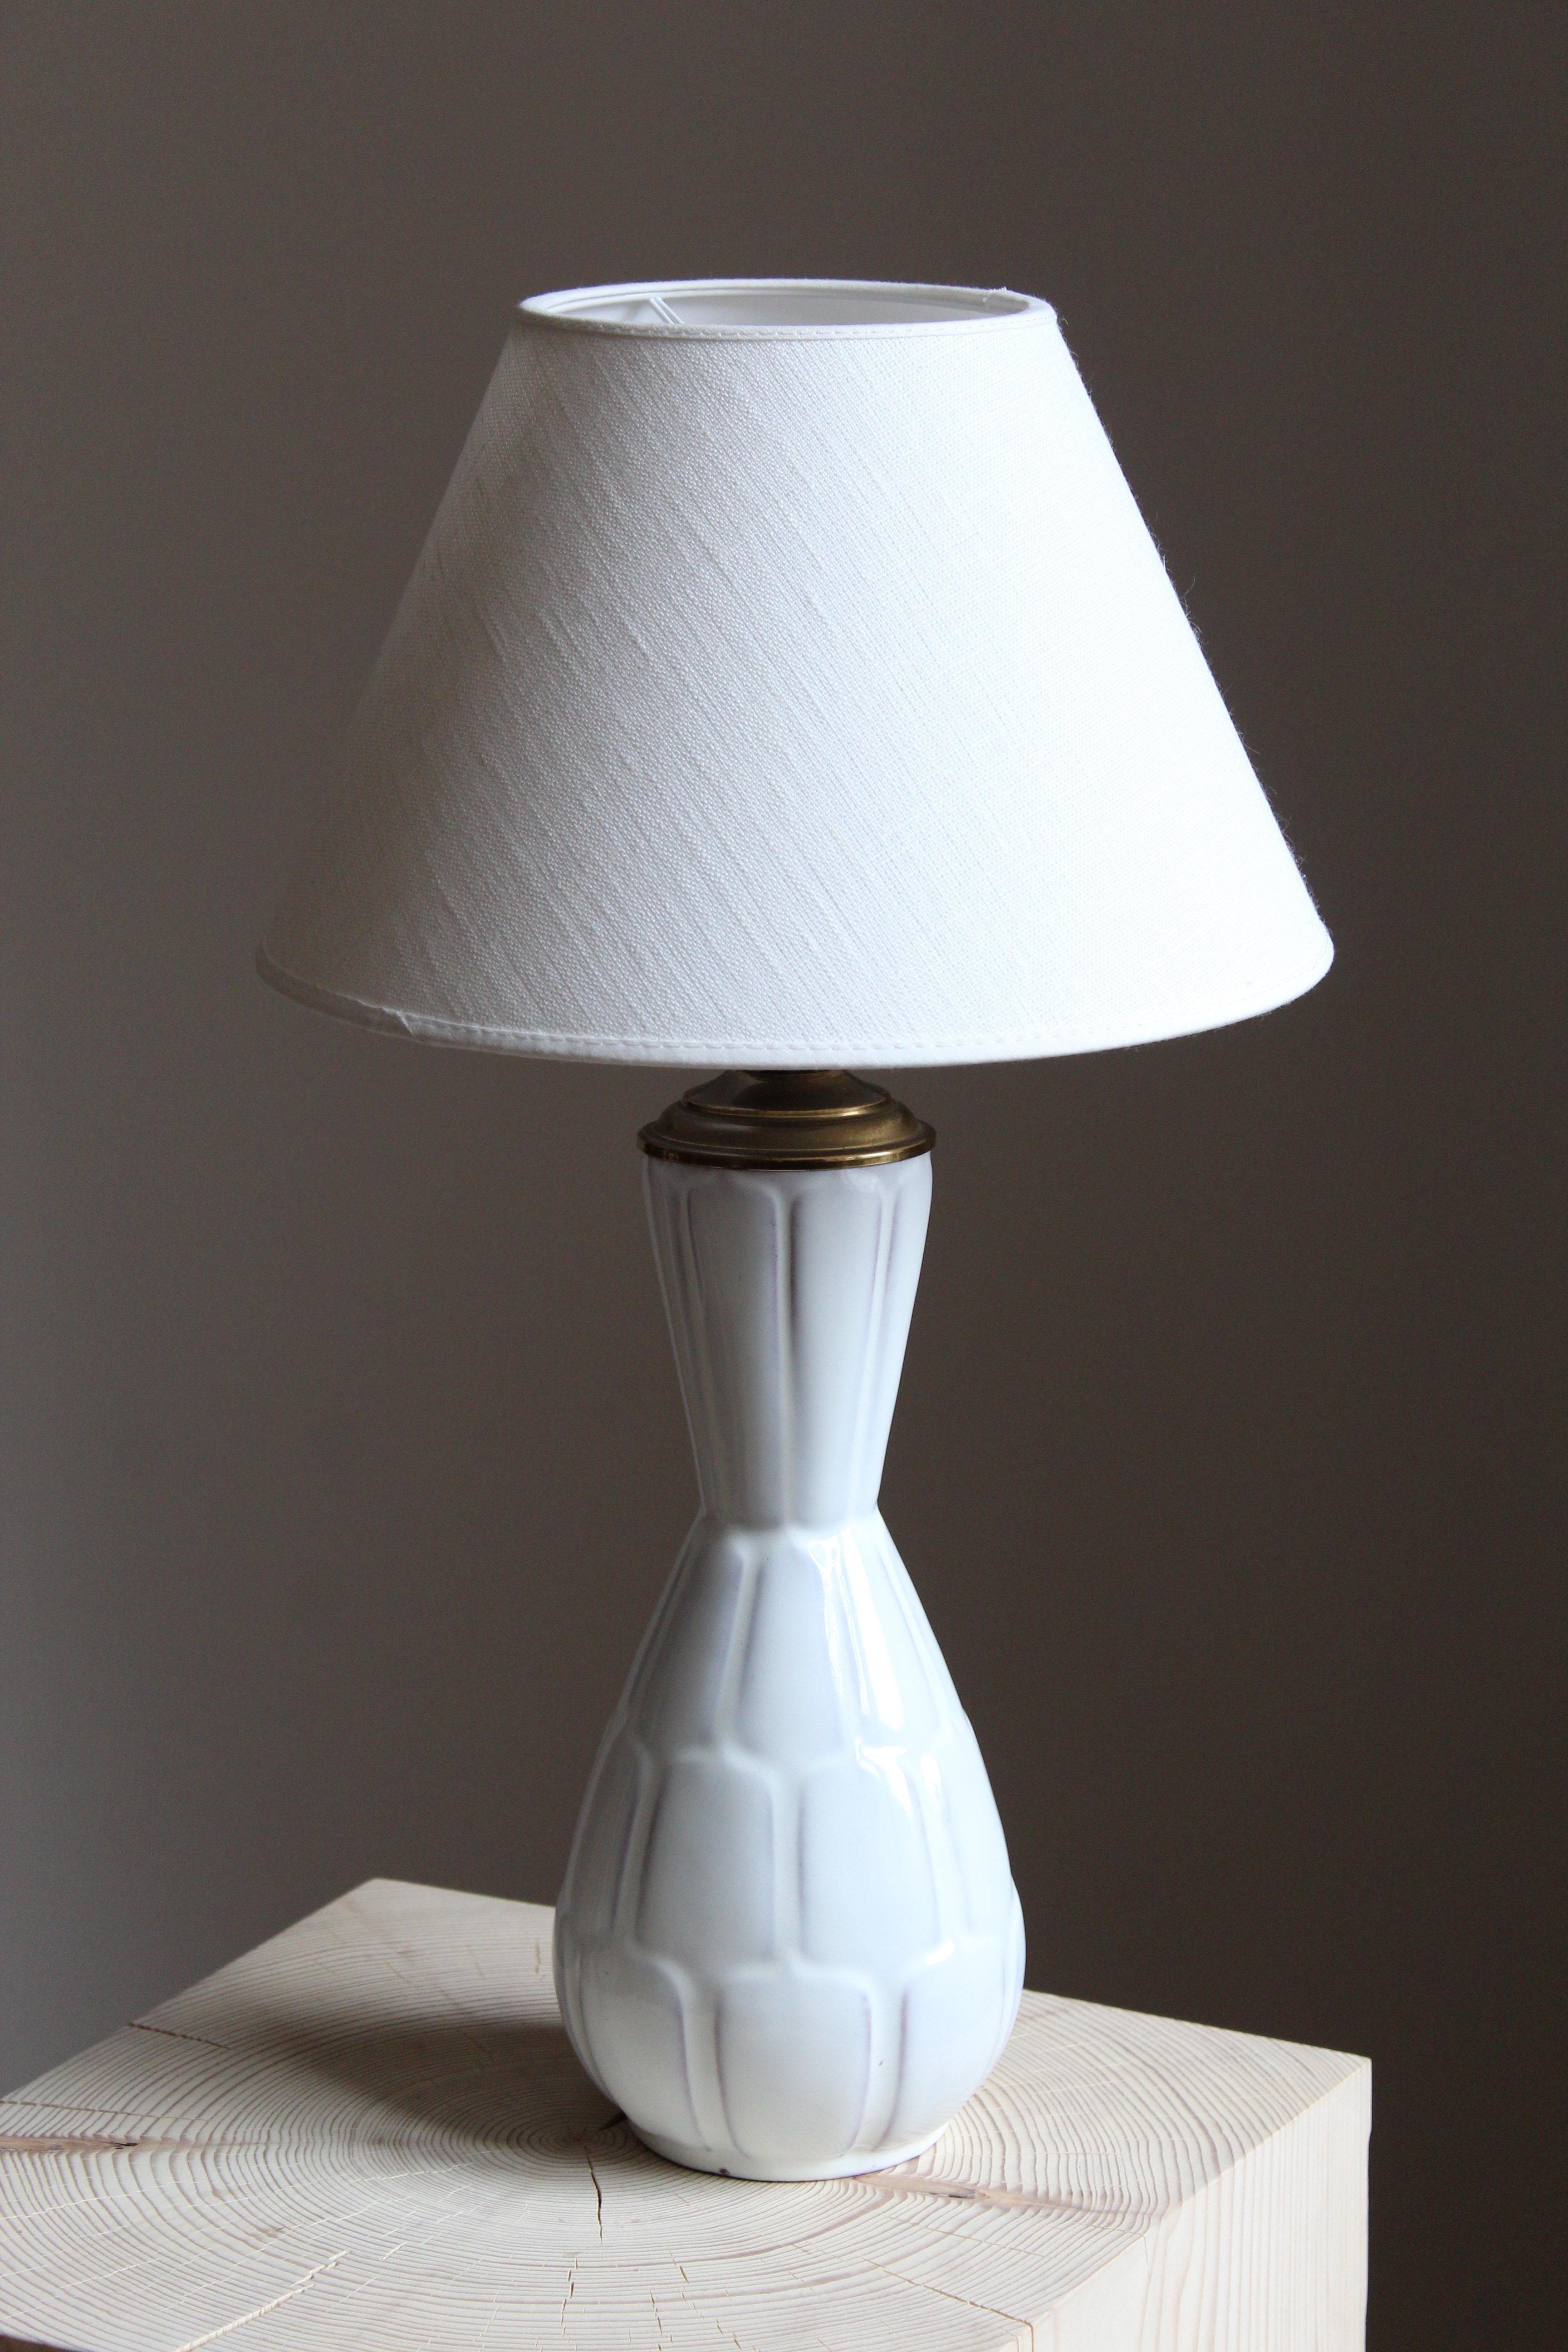 An early modernist table lamp. Designed by Anna-Lisa Thomson, for Upsala-Ekeby, Sweden, 1940s. With stamp including artists initials. Lampshade not included.

Glaze features a white color.

Other designers of the period include Ettore Sottsass, Carl